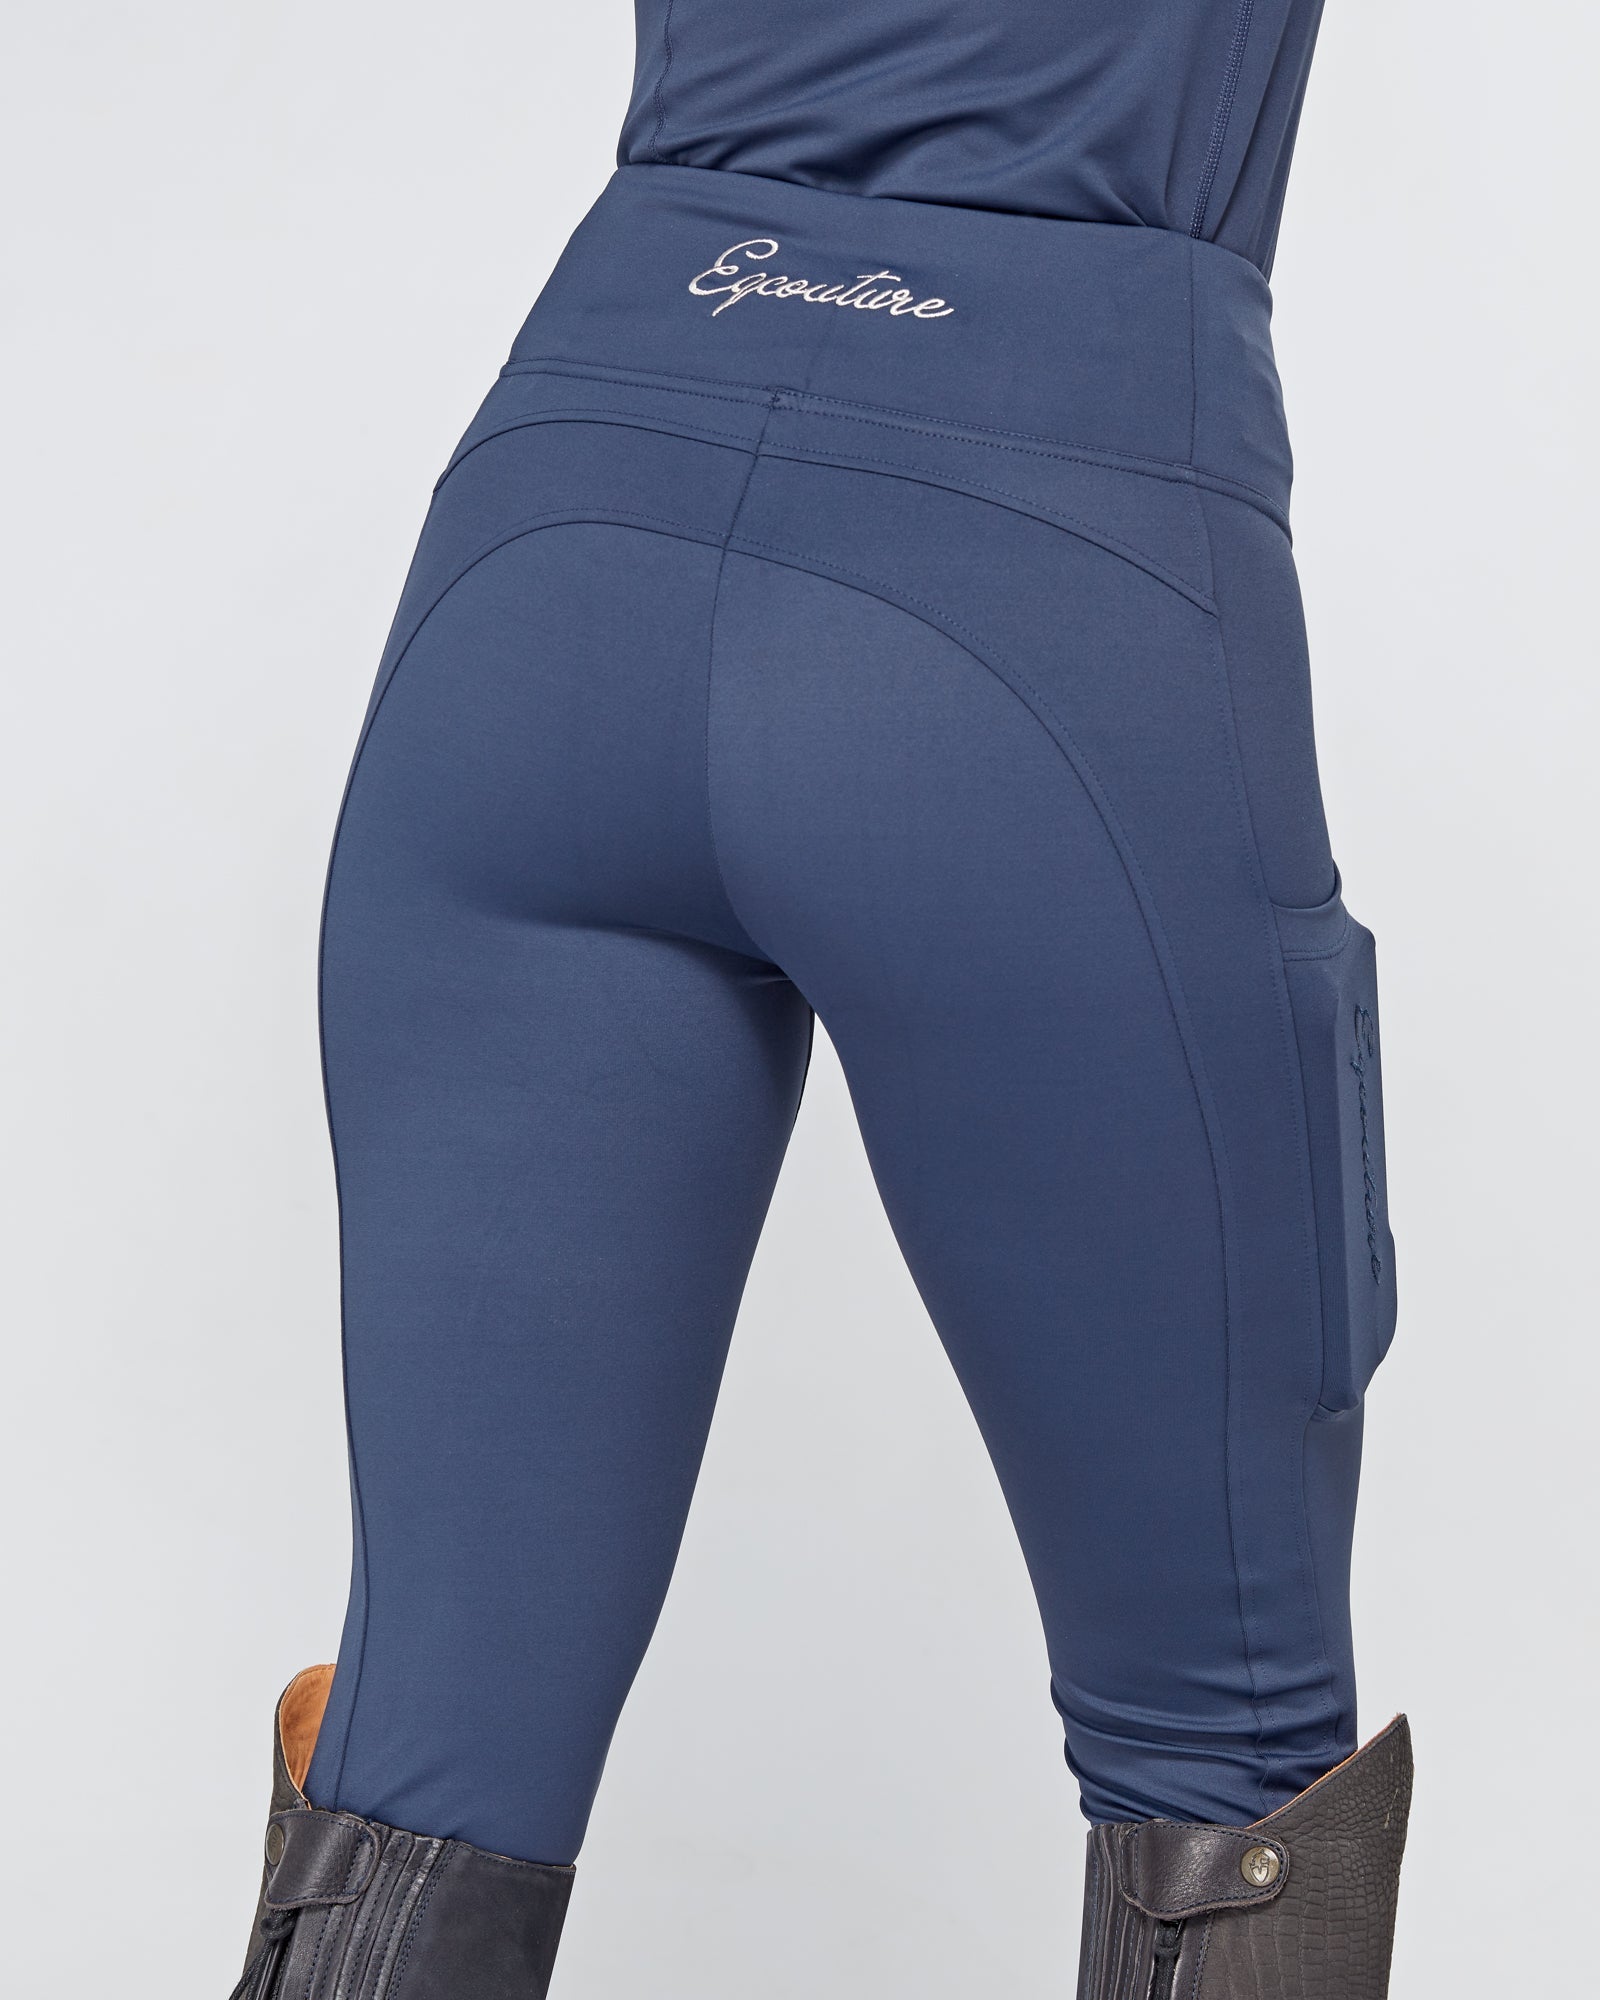 WINTER Navy Riding Leggings / Tights with Phone Pockets - NO GRIP/ SILICONE